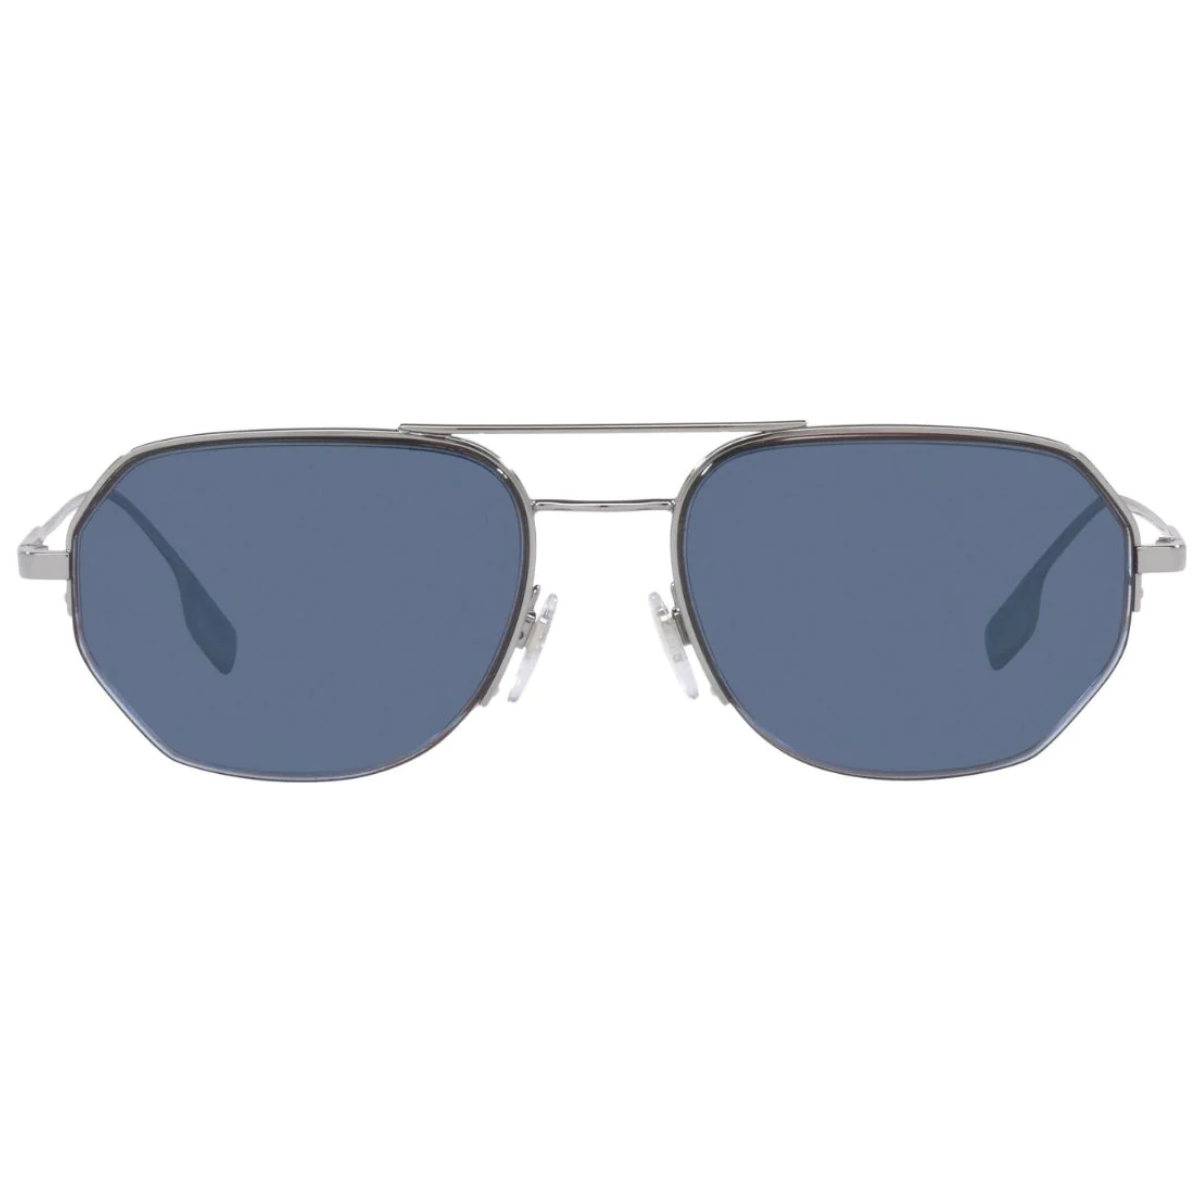 "Discover top-rated Burberry 3140 sunglasses for men at Optorium: Choose from pilot shape, polarized, and non-polarized options for the coolest shades and goggles for men."